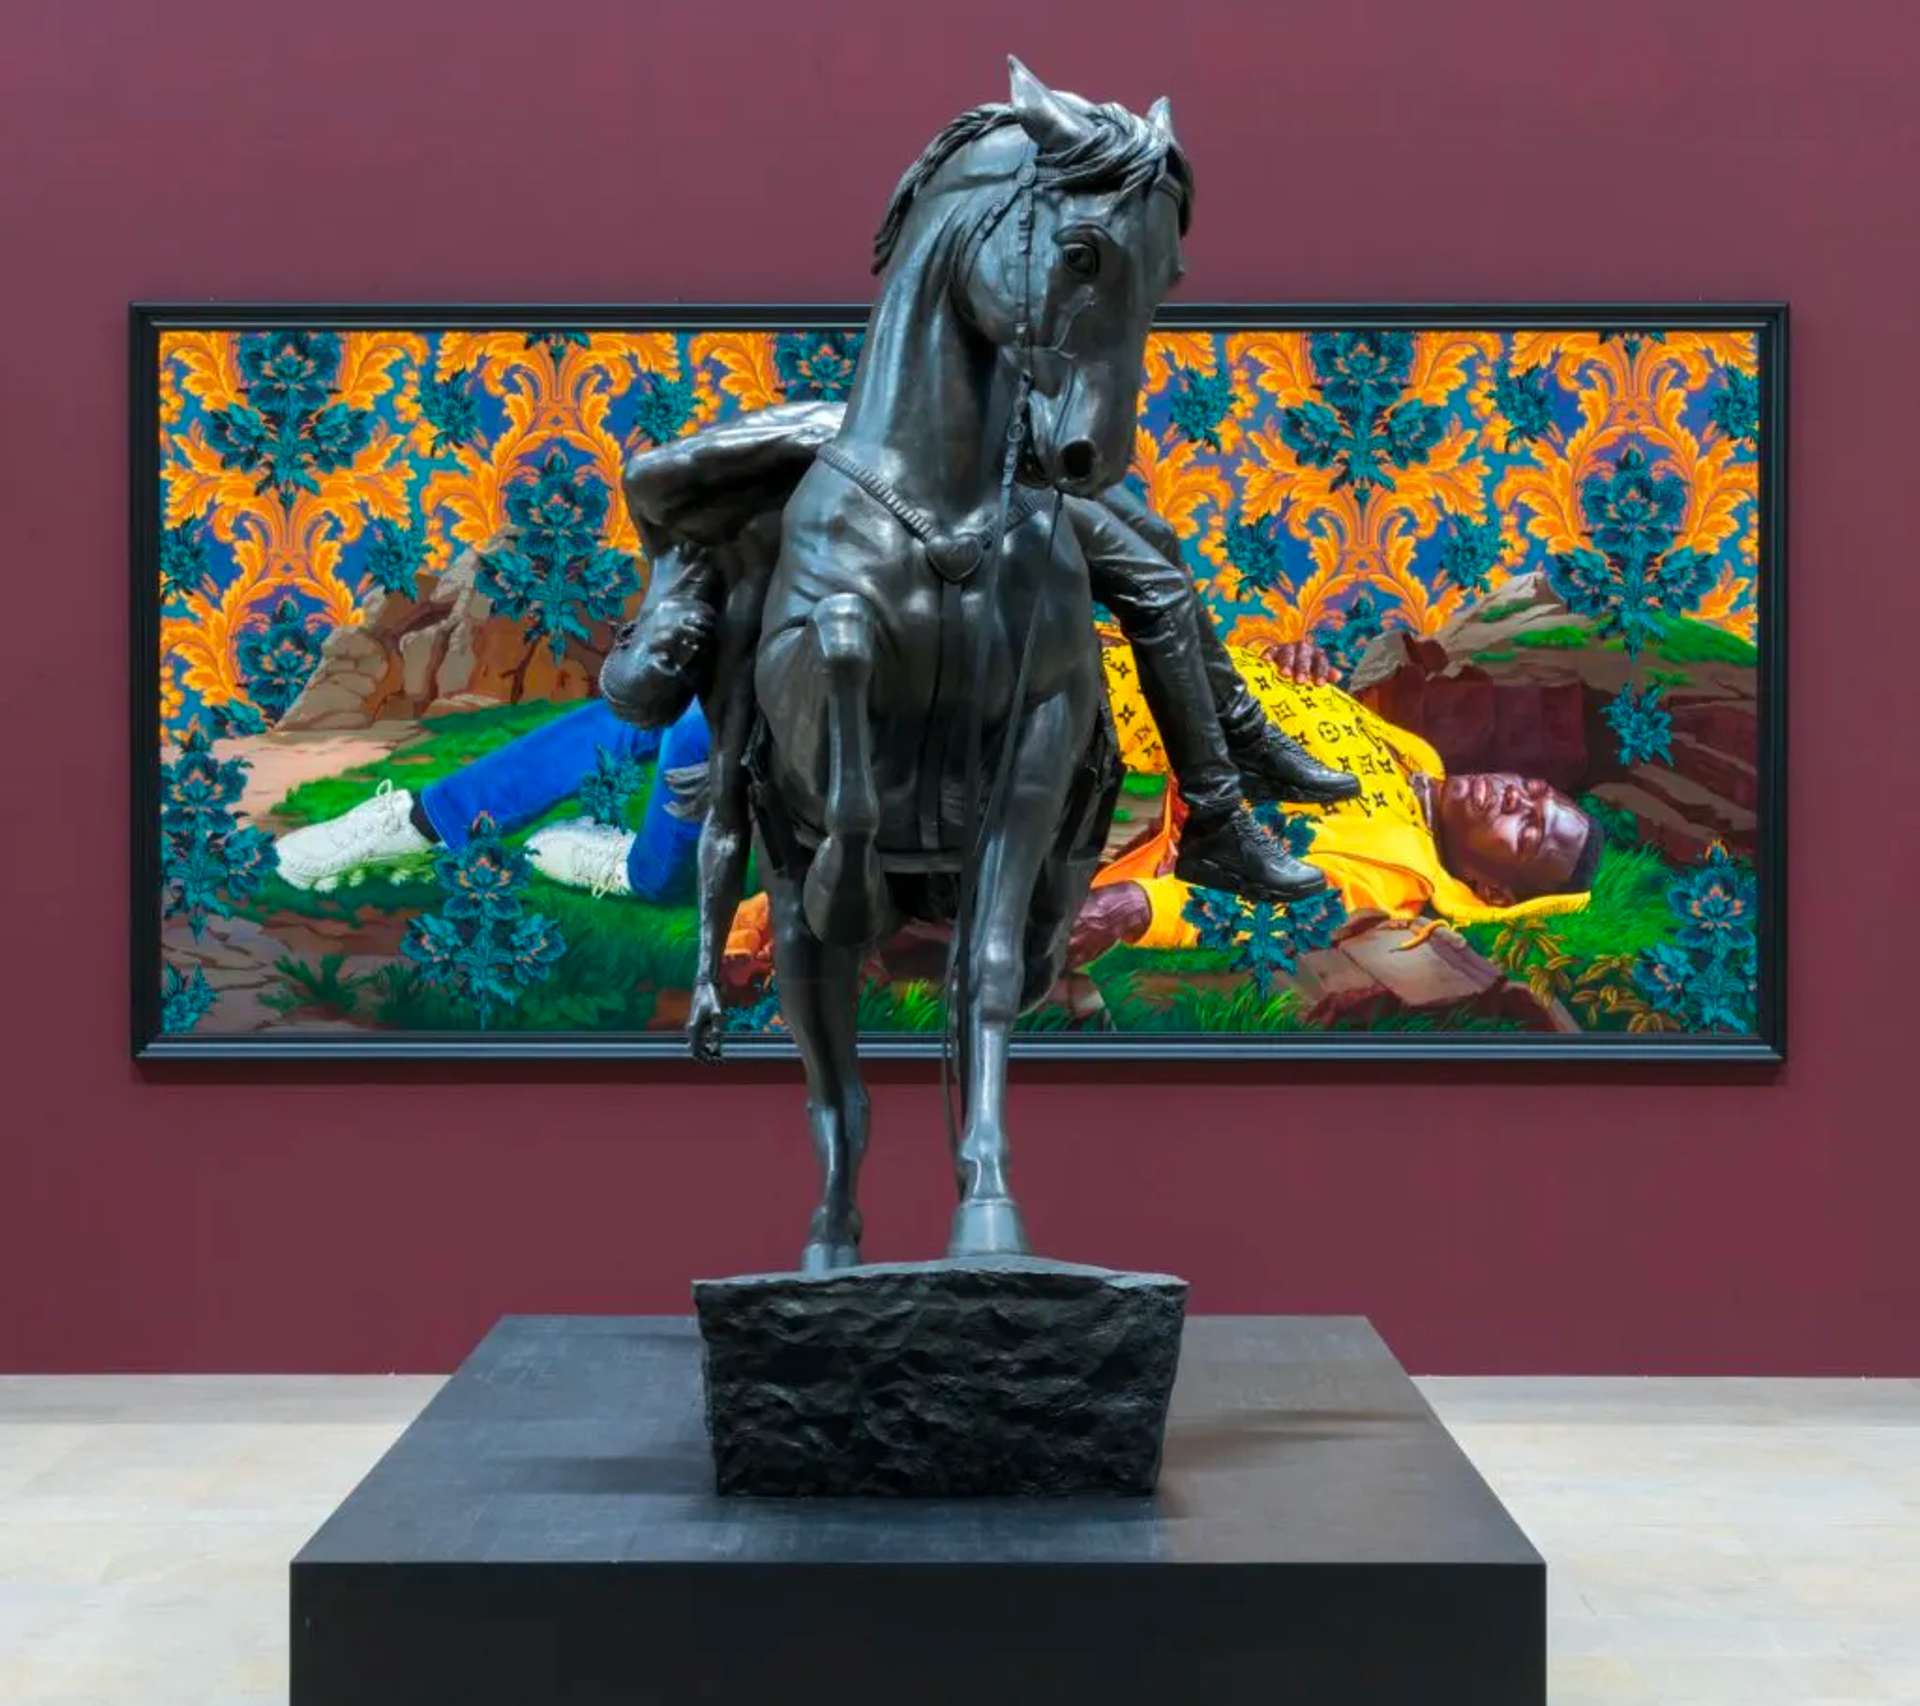 Large equestrian statue and large-scale portrait from Kehinde Wiley exhibition: An Archaeology of Silence at the De Young in San Francisco.